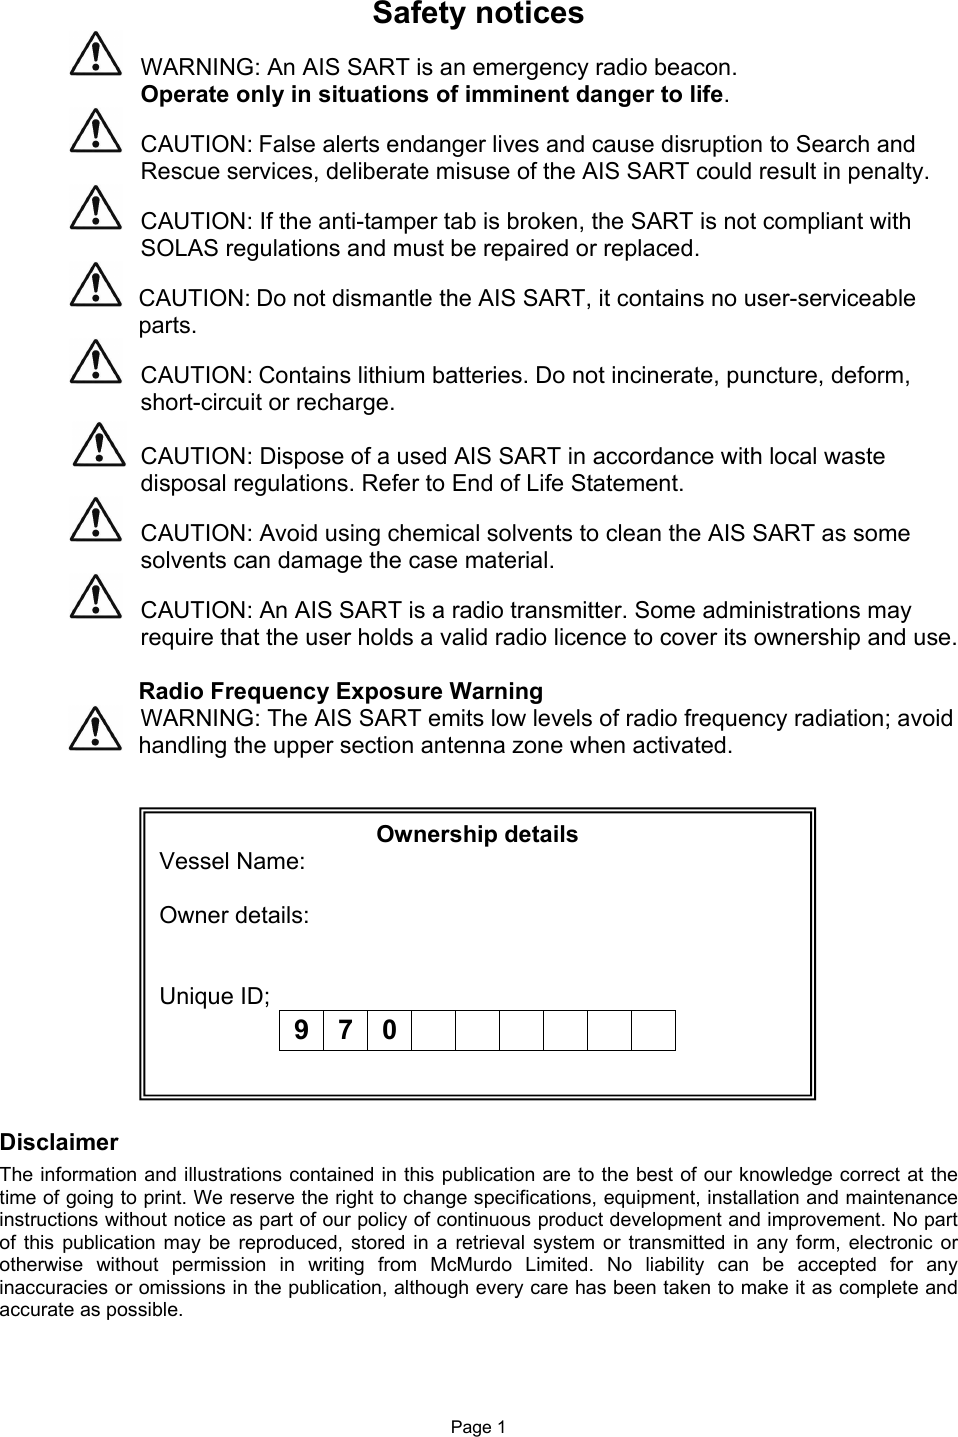  Page 1 Safety notices    WARNING: An AIS SART is an emergency radio beacon. Operate only in situations of imminent danger to life.   CAUTION: False alerts endanger lives and cause disruption to Search and Rescue services, deliberate misuse of the AIS SART could result in penalty.    CAUTION: If the anti-tamper tab is broken, the SART is not compliant with   SOLAS regulations and must be repaired or replaced.    CAUTION: Do not dismantle the AIS SART, it contains no user-serviceable parts.   CAUTION: Contains lithium batteries. Do not incinerate, puncture, deform, short-circuit or recharge.  CAUTION: Dispose of a used AIS SART in accordance with local waste disposal regulations. Refer to End of Life Statement.   CAUTION: Avoid using chemical solvents to clean the AIS SART as some solvents can damage the case material.   CAUTION: An AIS SART is a radio transmitter. Some administrations may require that the user holds a valid radio licence to cover its ownership and use.  Radio Frequency Exposure Warning   WARNING: The AIS SART emits low levels of radio frequency radiation; avoid handling the upper section antenna zone when activated.                 Disclaimer The information and illustrations contained in this publication are to the best of our knowledge correct at the time of going to print. We reserve the right to change specifications, equipment, installation and maintenance instructions without notice as part of our policy of continuous product development and improvement. No part of  this  publication may  be  reproduced,  stored  in a  retrieval system  or  transmitted in  any form,  electronic or otherwise  without  permission  in  writing  from  McMurdo  Limited.  No  liability  can  be  accepted  for  any inaccuracies or omissions in the publication, although every care has been taken to make it as complete and accurate as possible. Ownership details Vessel Name:  Owner details:   Unique ID;  9 7 0              